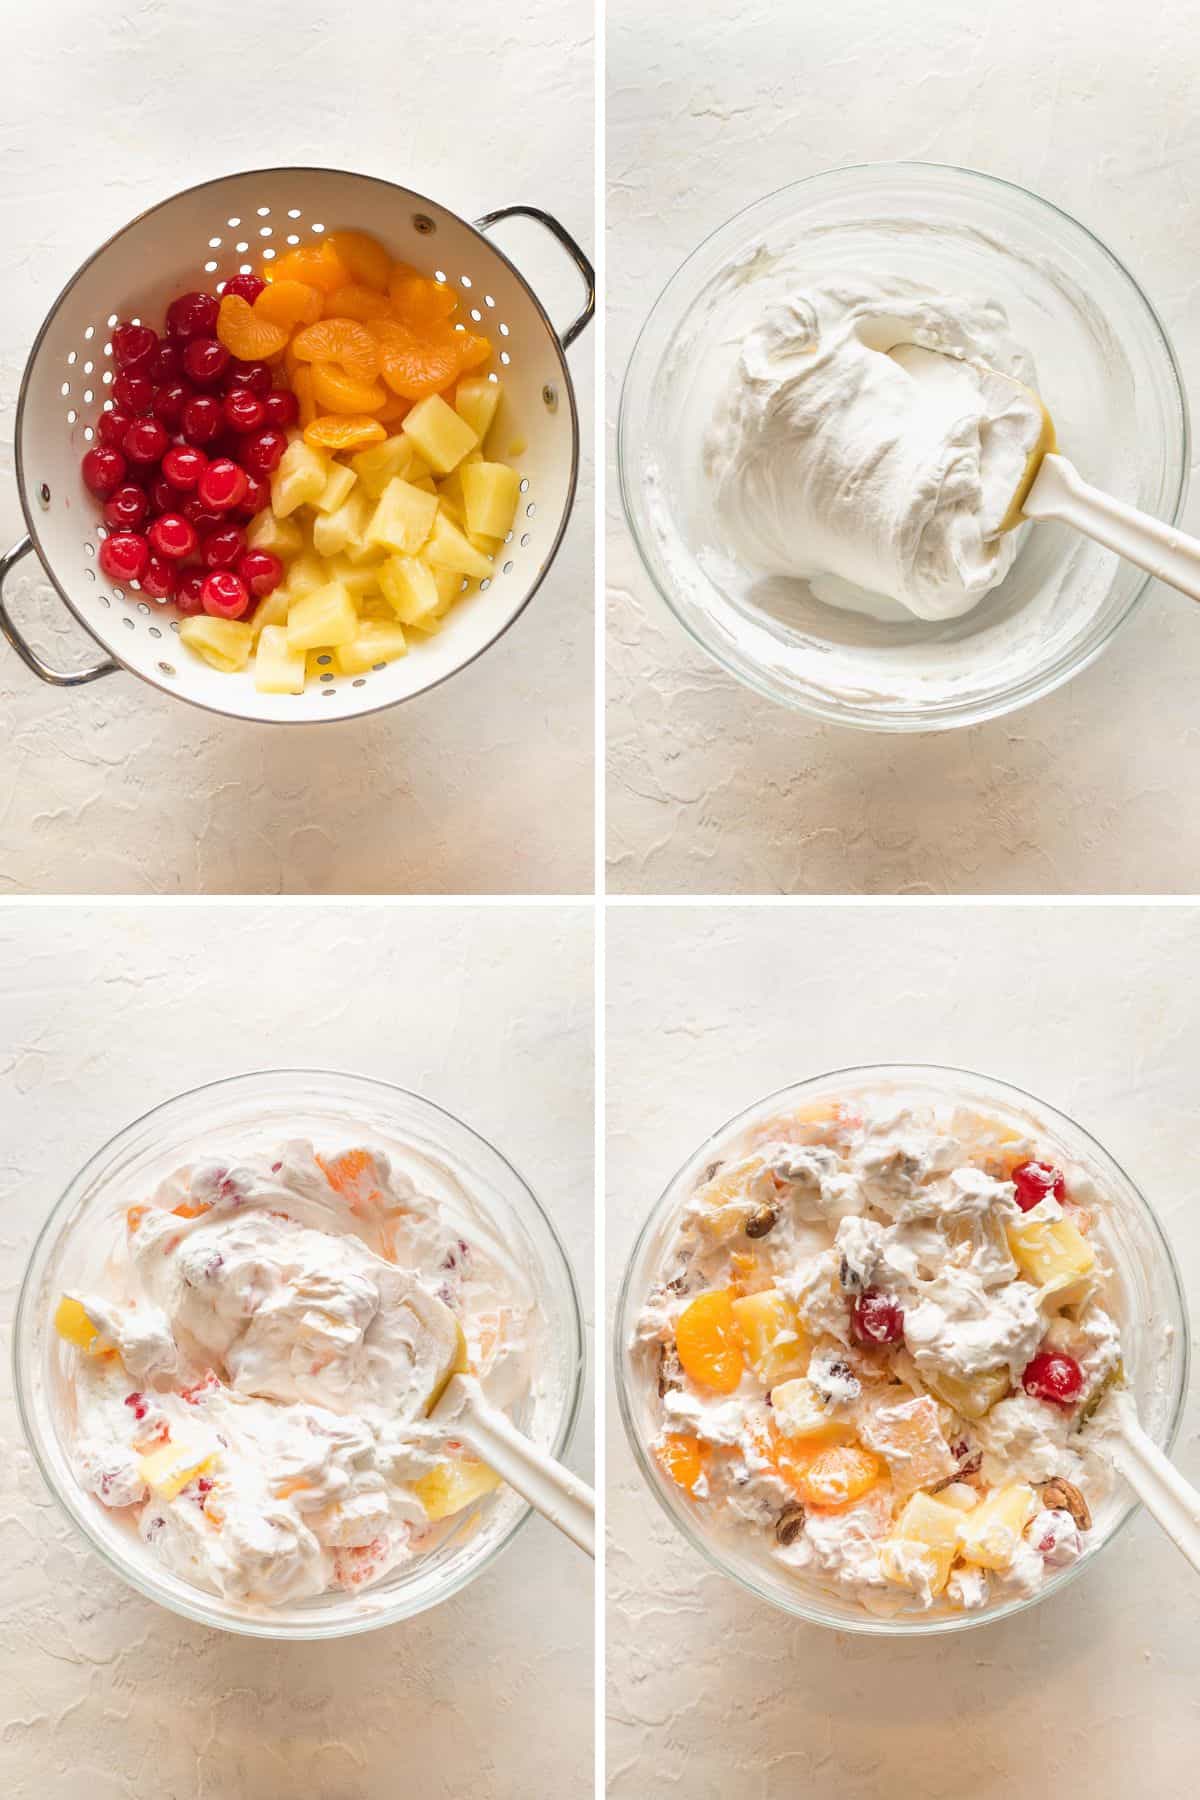 a collage of fruit being drained then a creamy mixture being stirred before adding to the fruit along with other ingredients for an ambrosia fruit salad